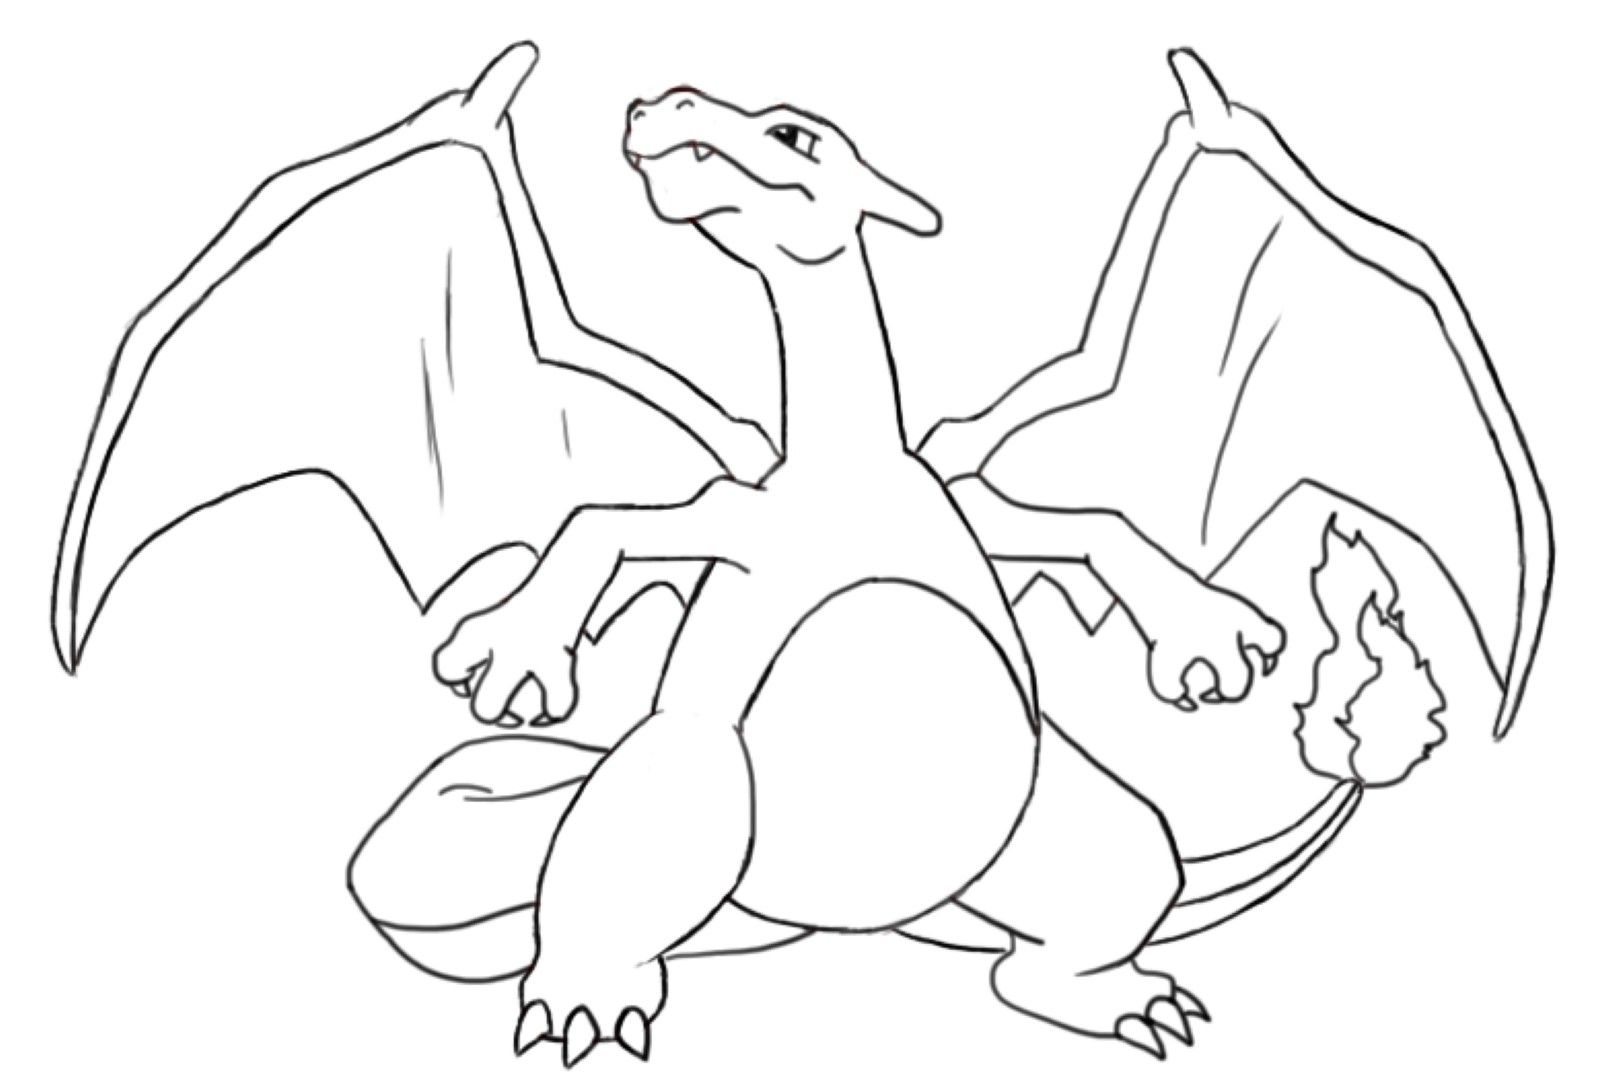 Printable Charizard Coloring Pages - Mega Charizard Coloring Pages